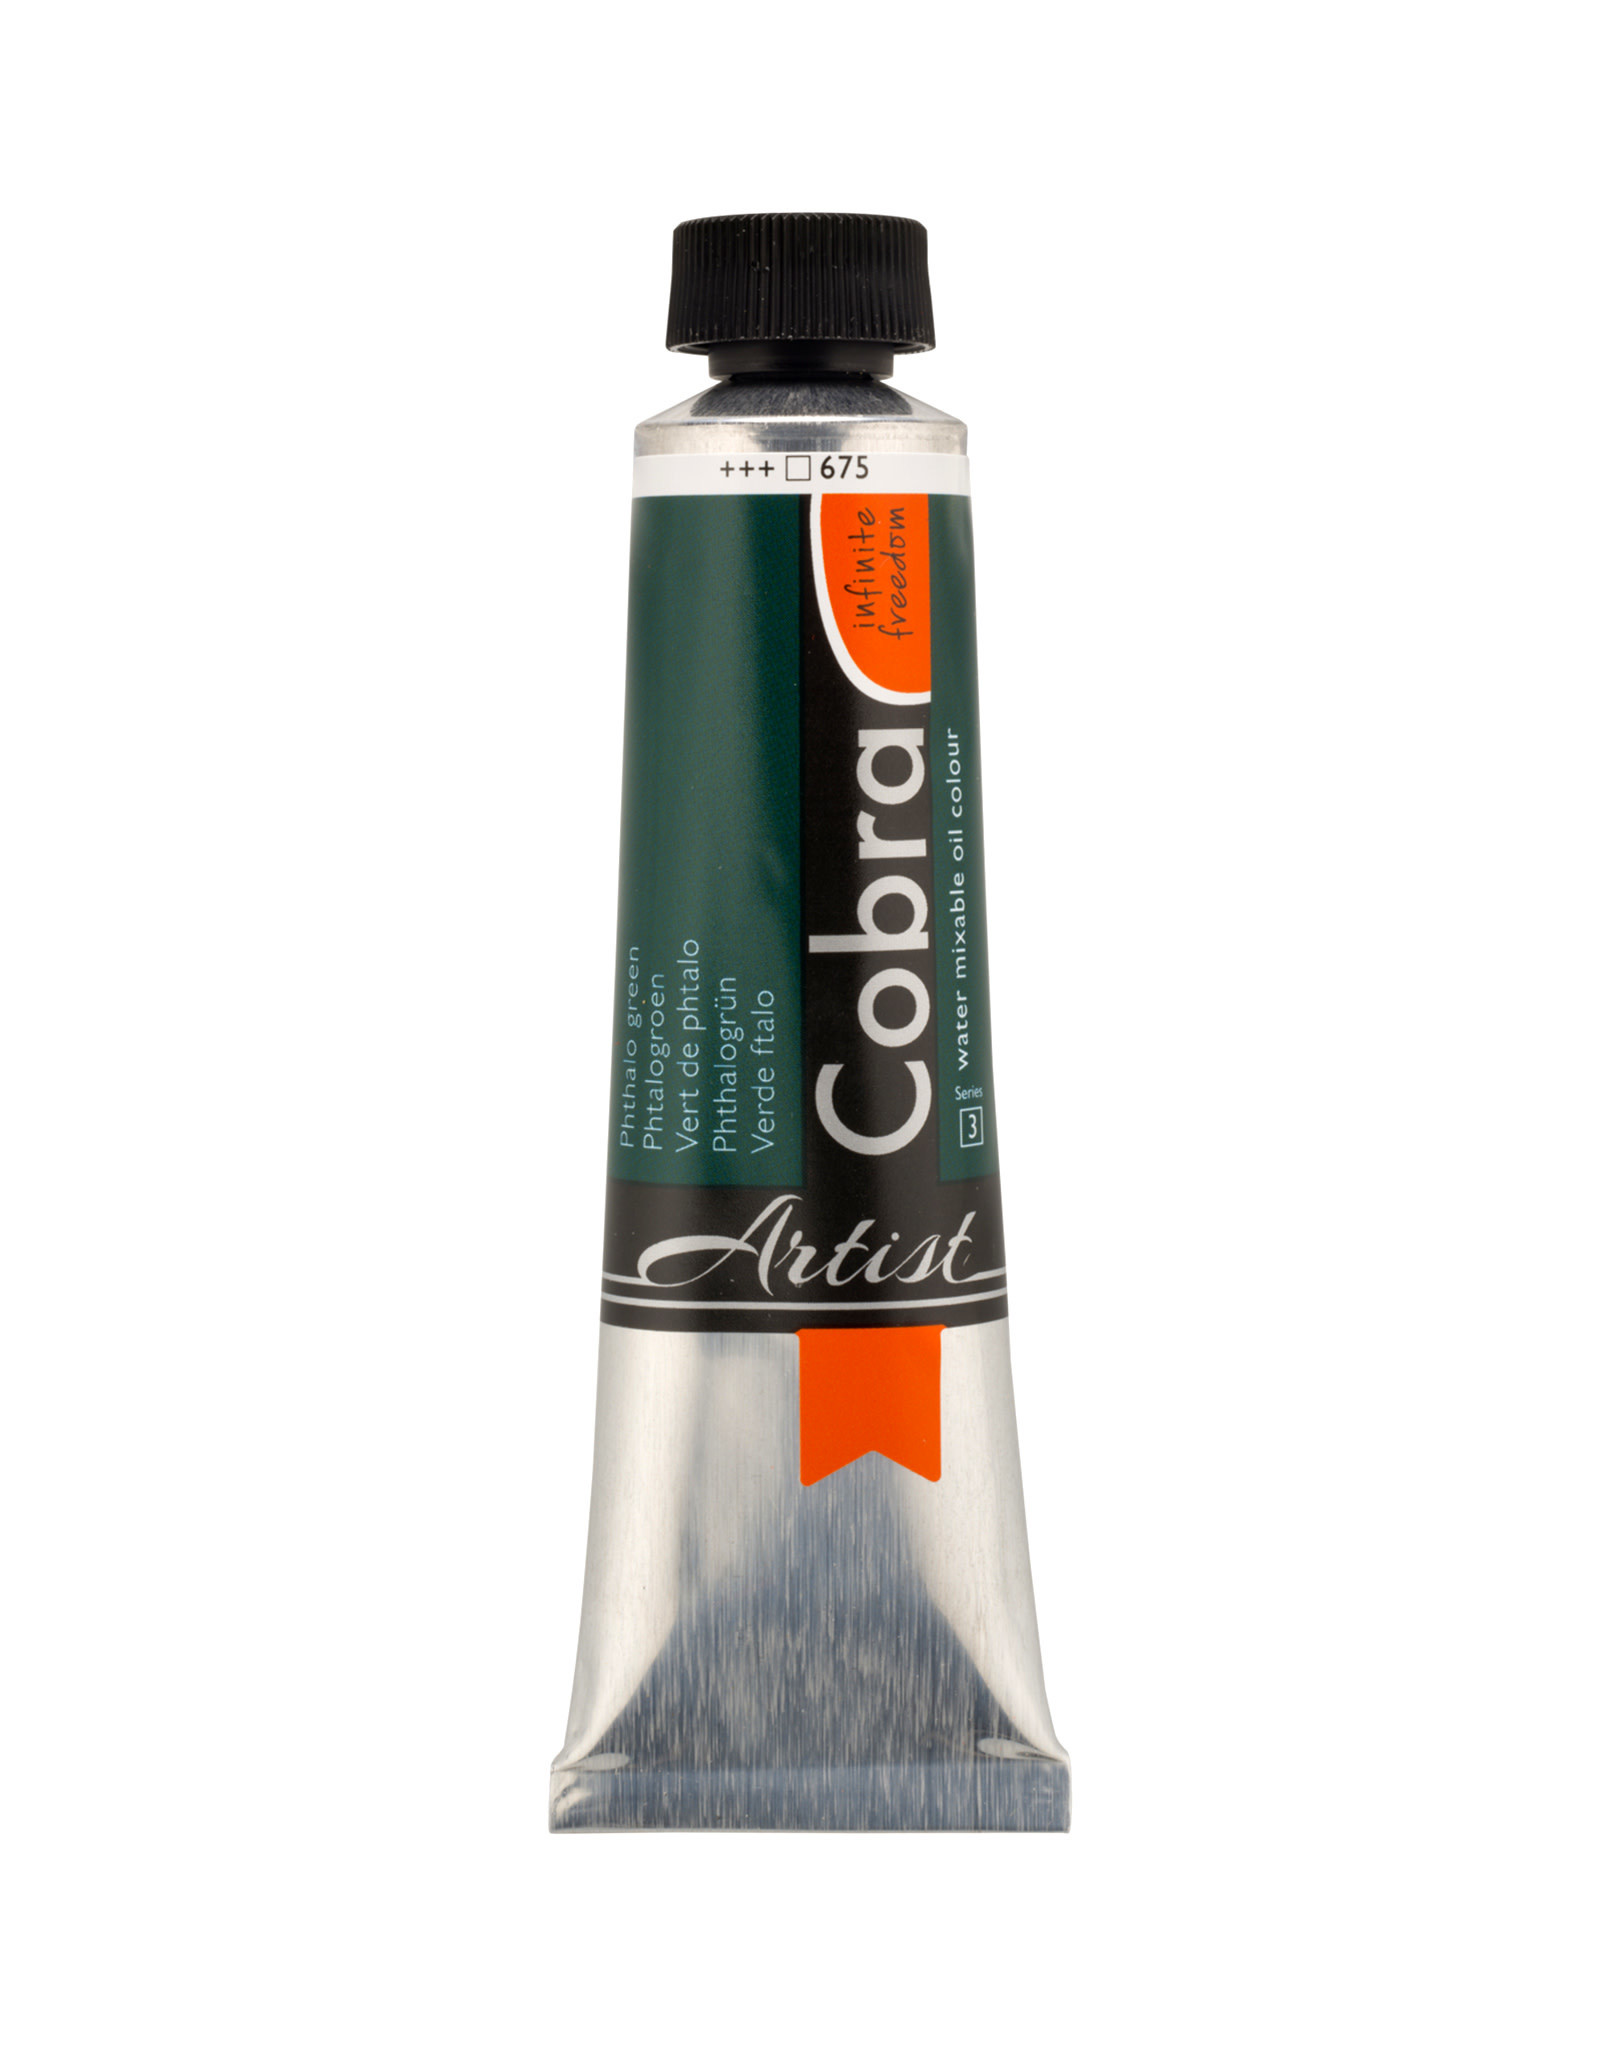 Royal Talens Cobra Water Mixable Artist Oils, Phthalo Green 40ml